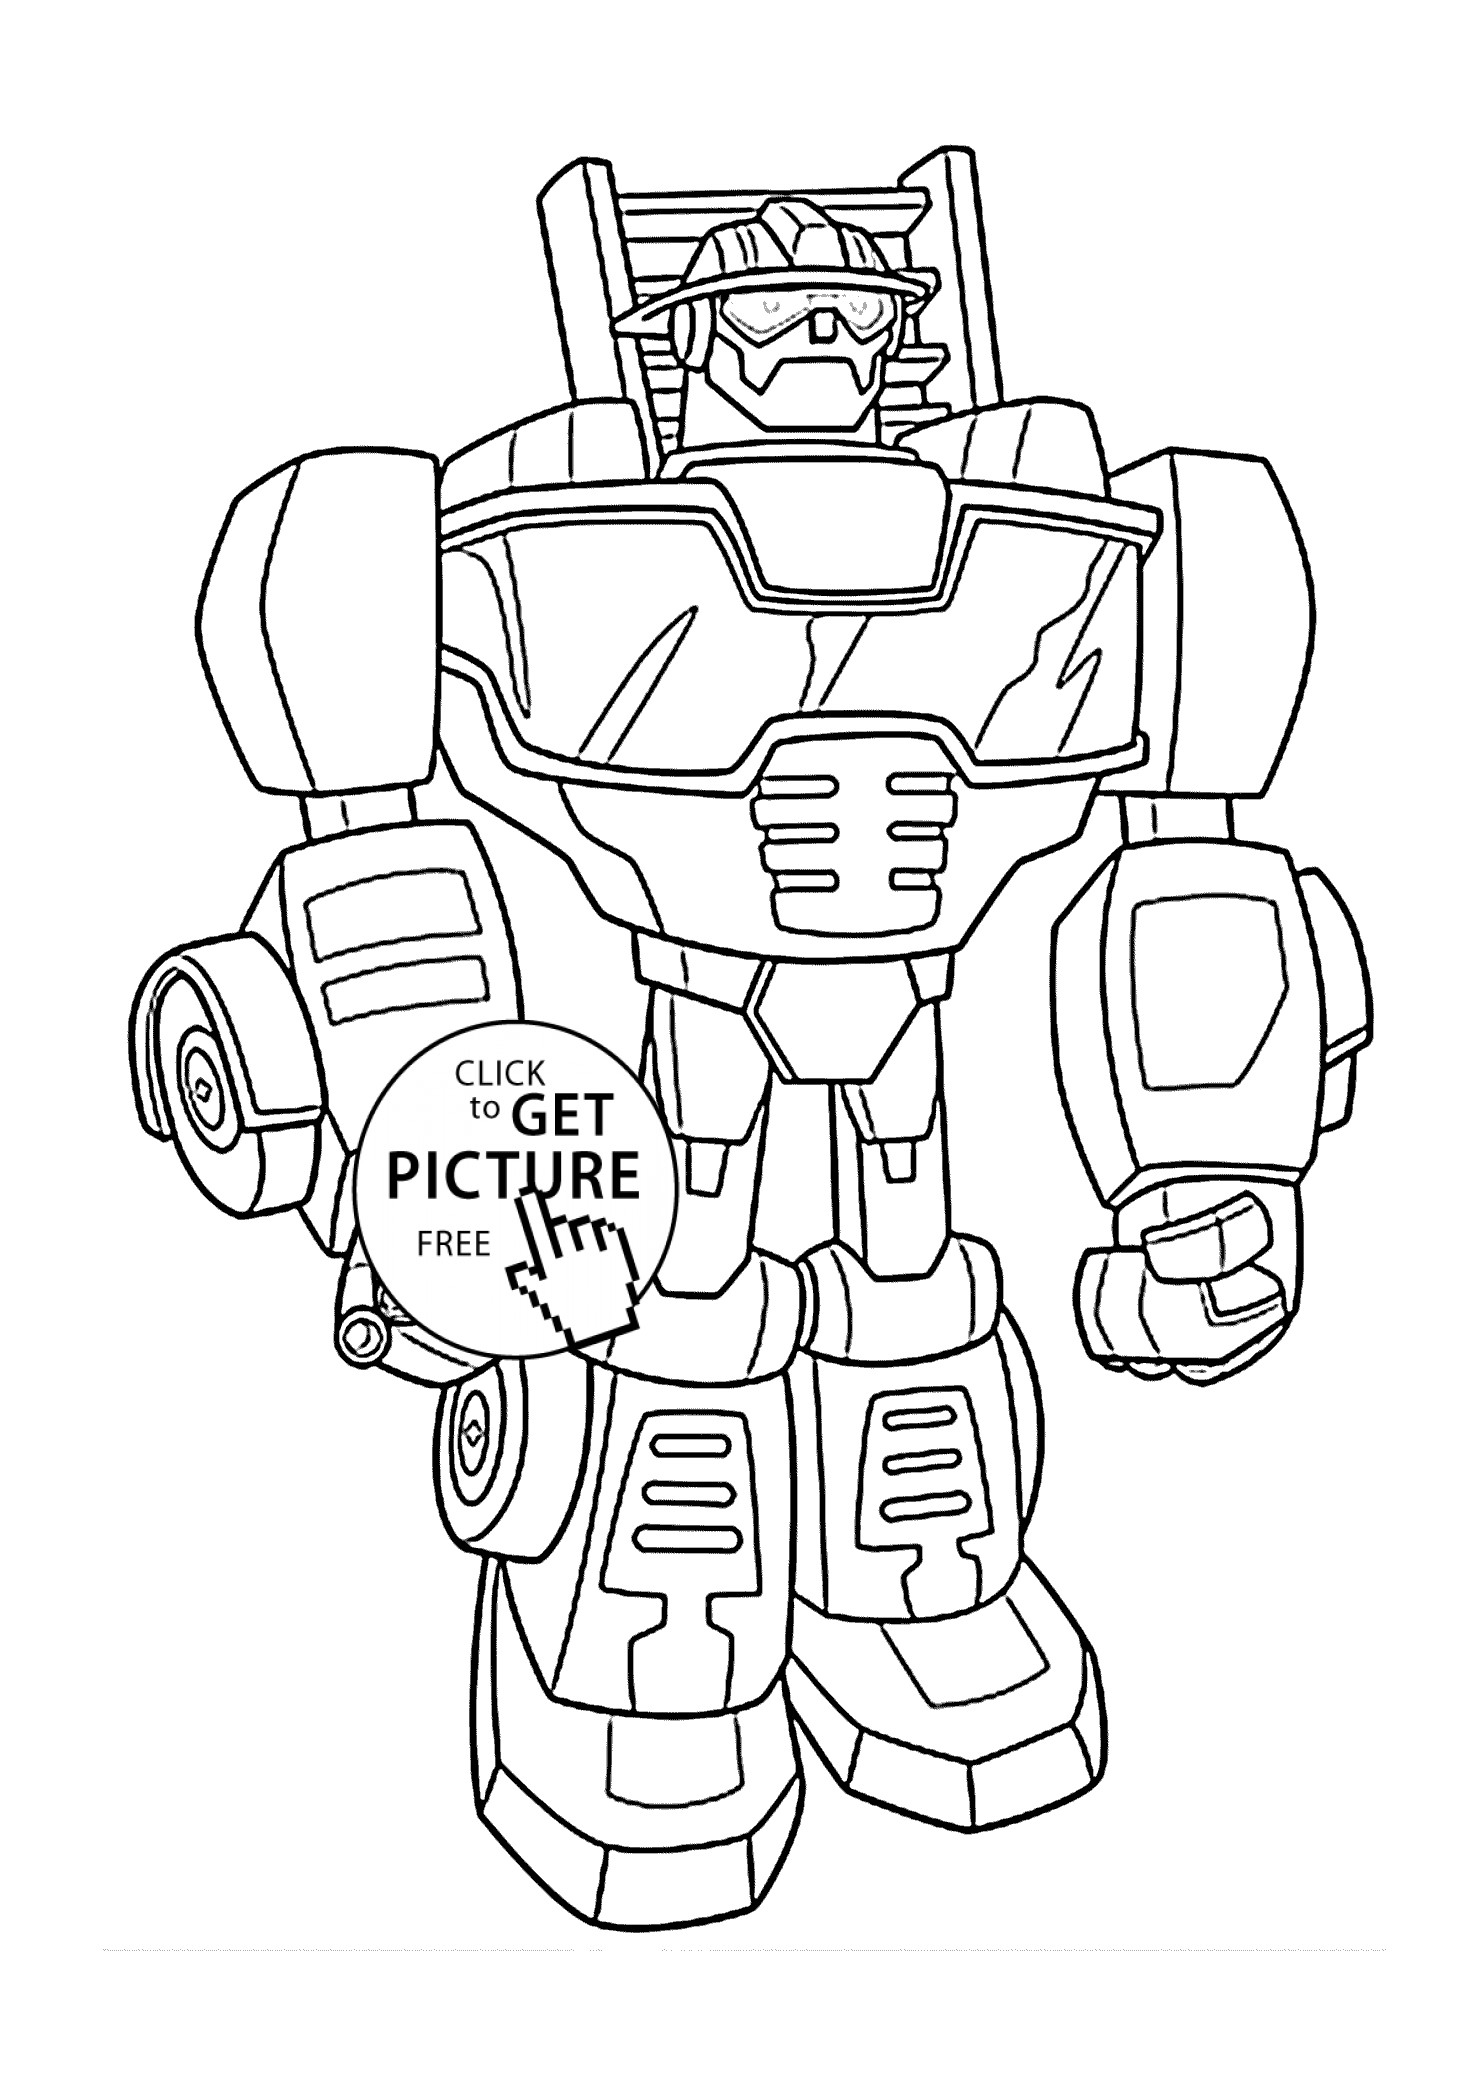 Rescue Bot Coloring Pages
 Heatwave bot coloring pages for kids printable free